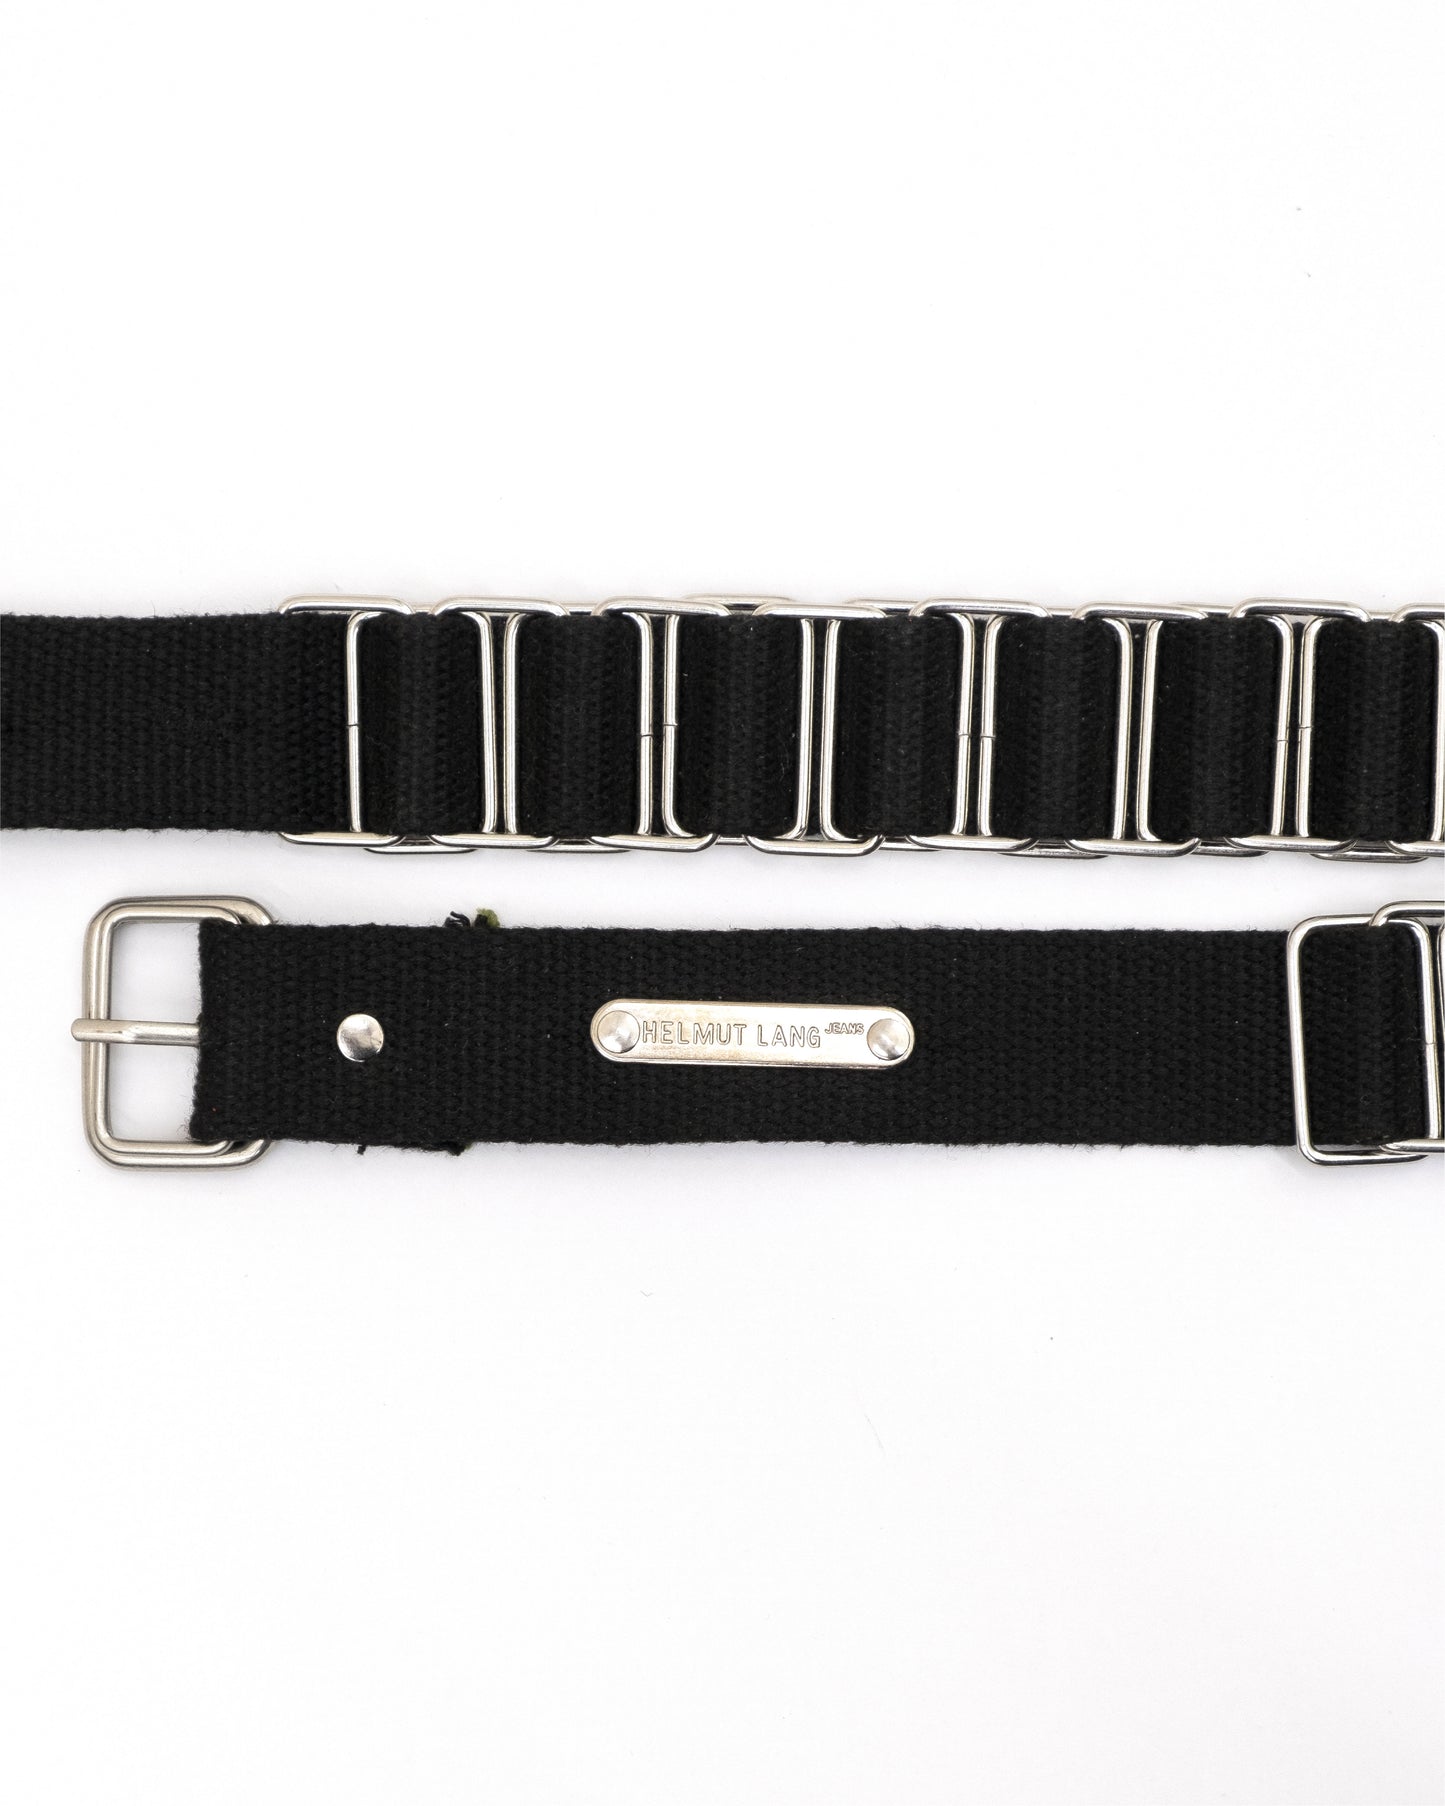 Helmut Lang AW98 Military Buckle Belt